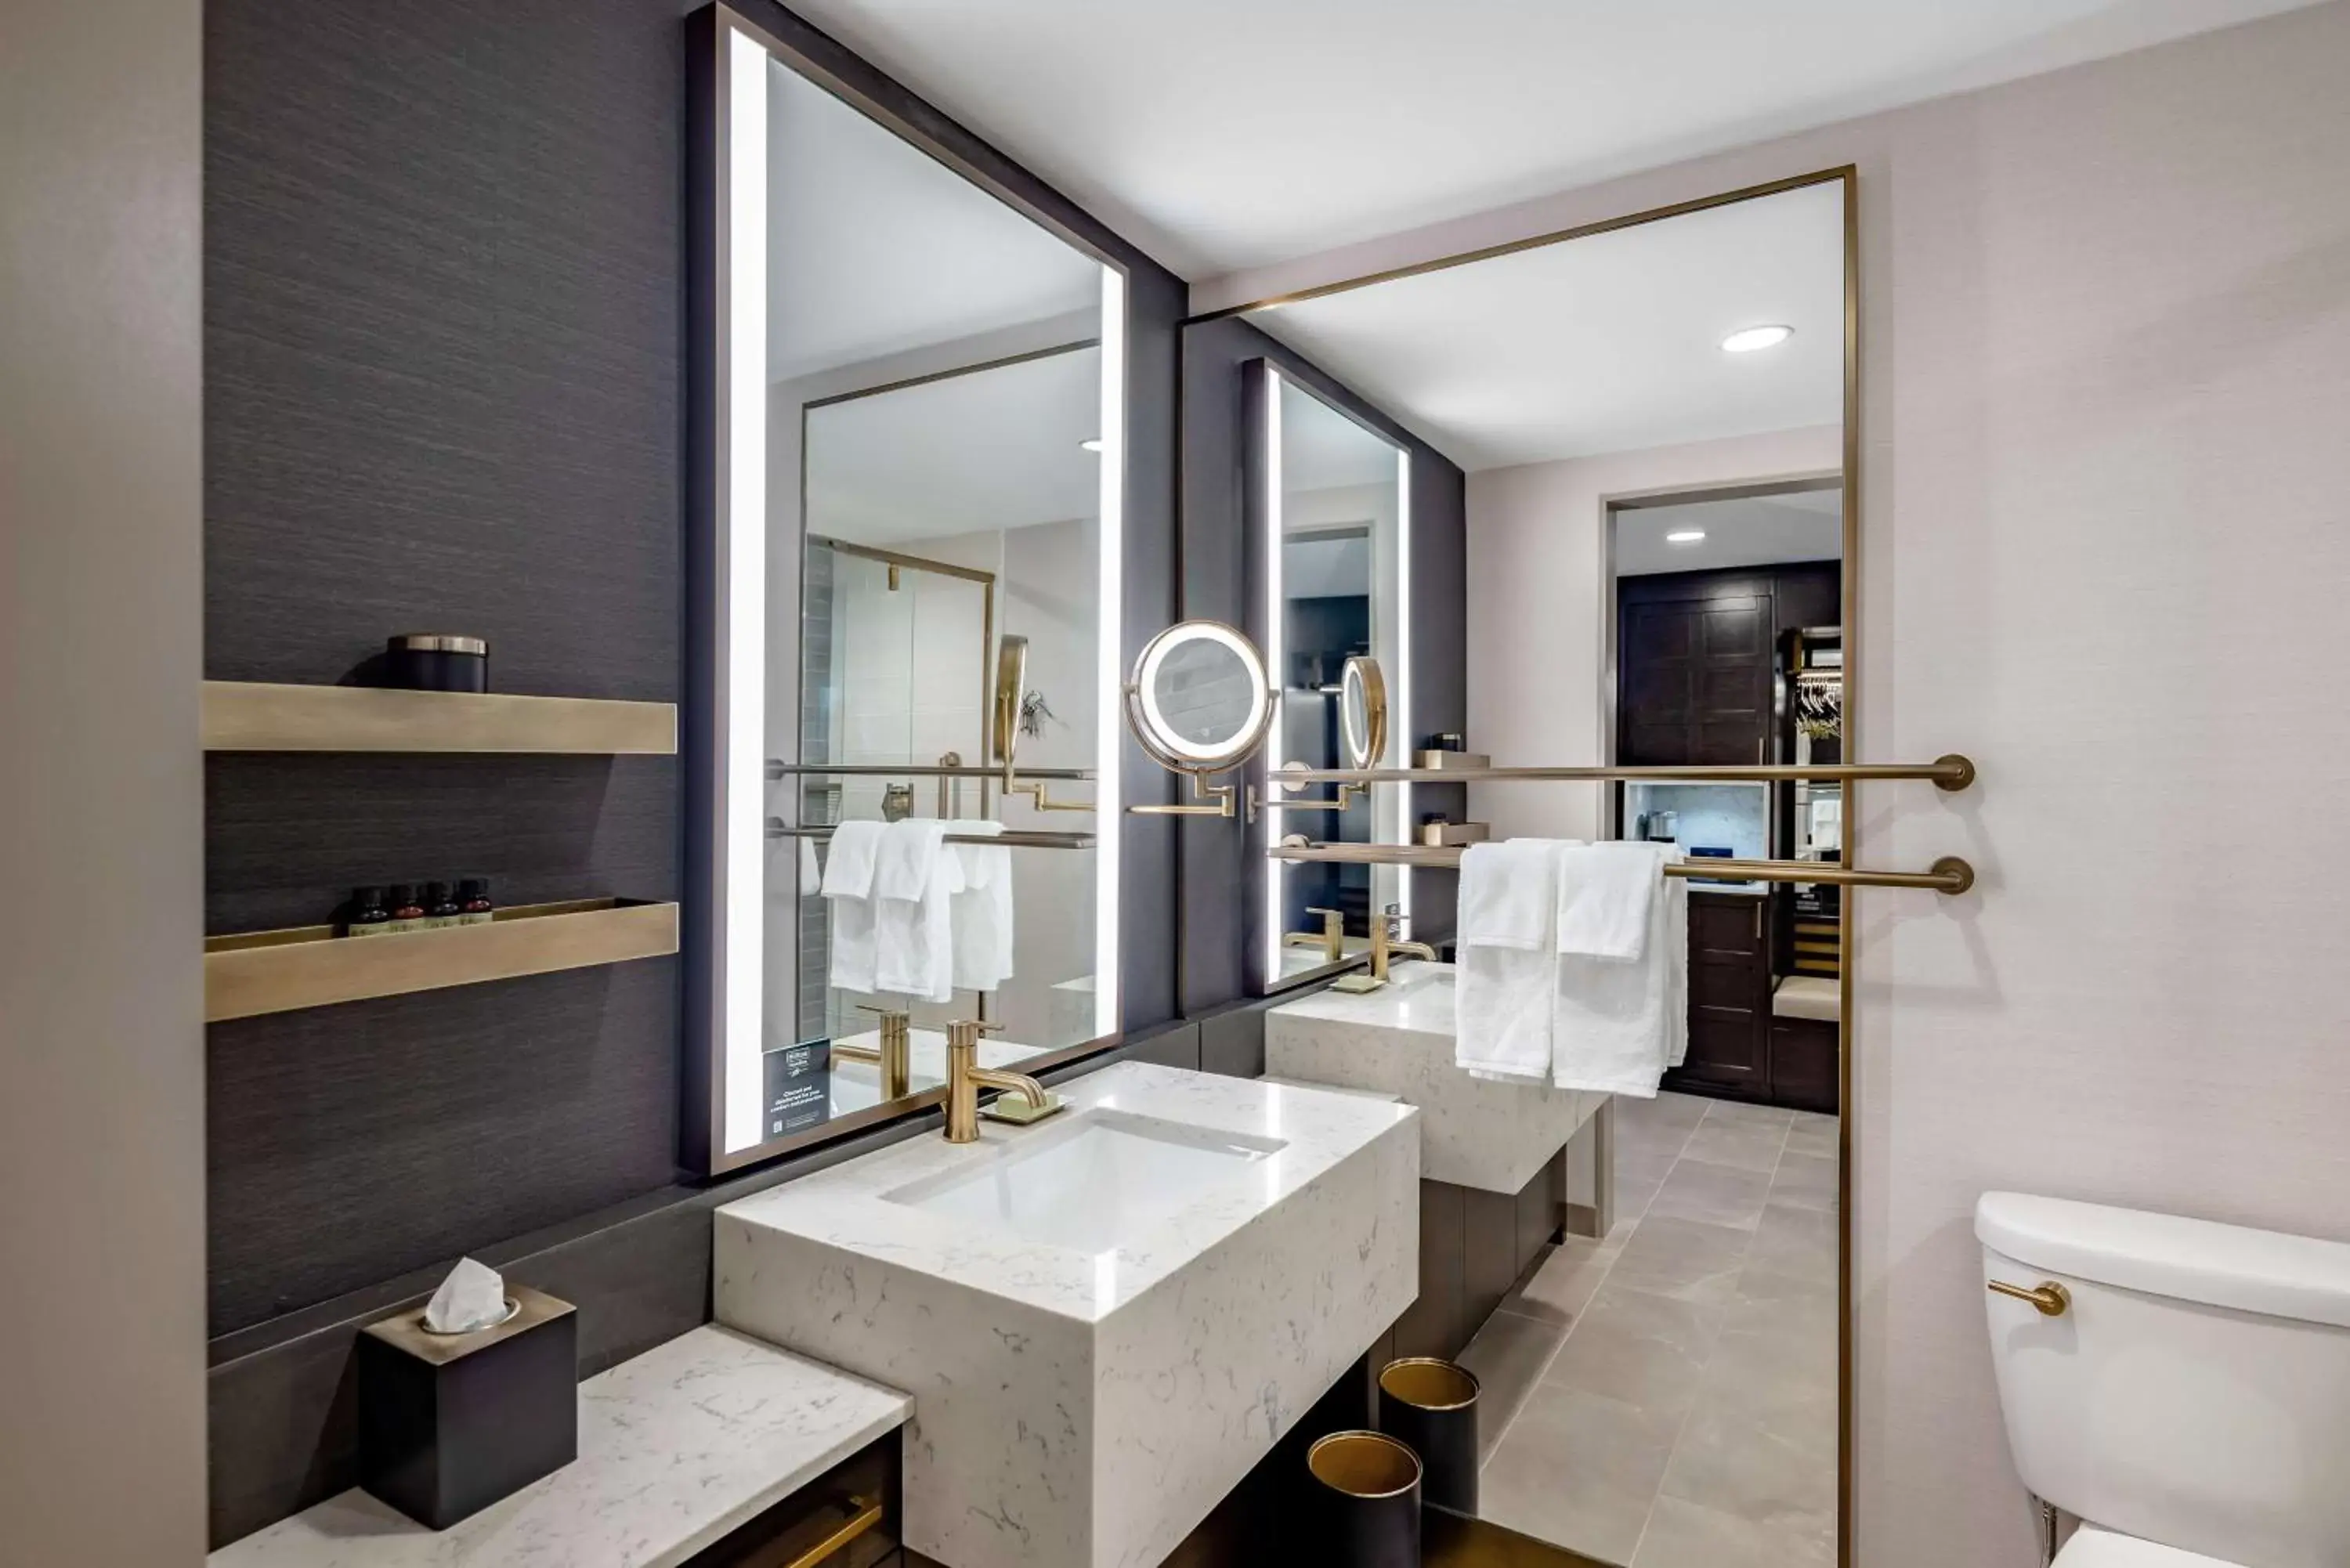 Bathroom in Hotel Fort Des Moines, Curio Collection By Hilton